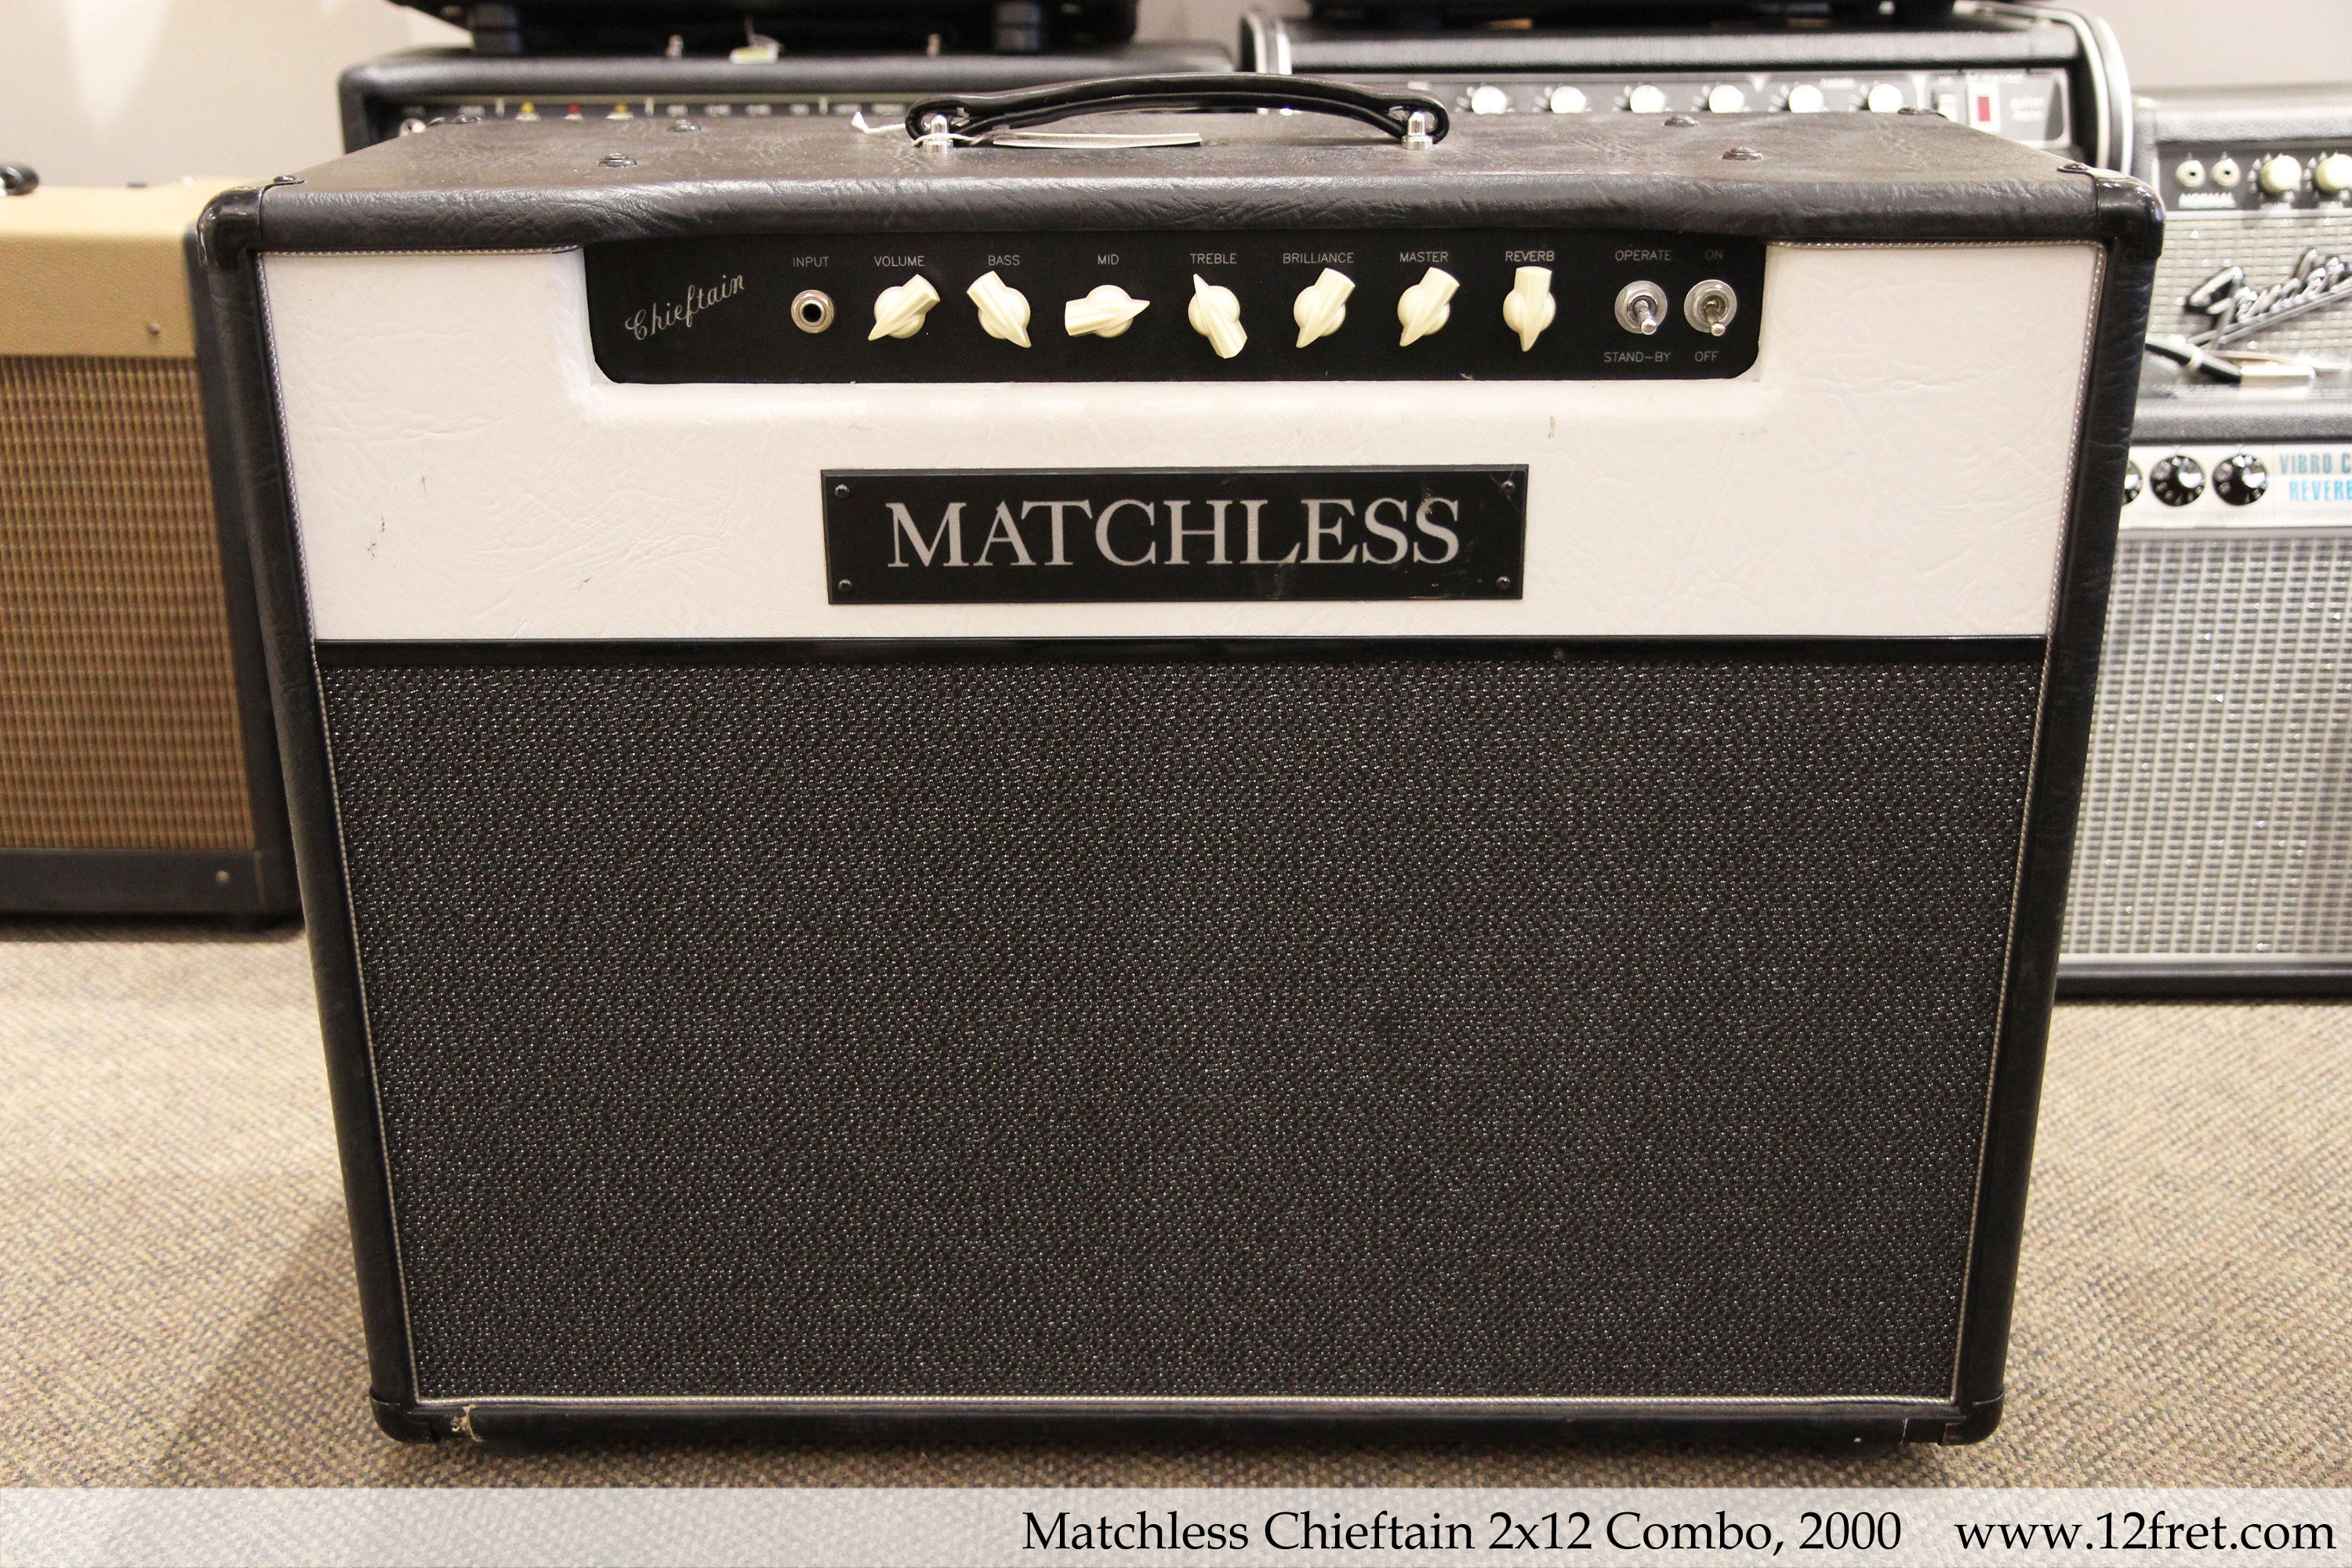 Matchless Chieftain 2x12 Combo, 2000 - The Twelfth Fret